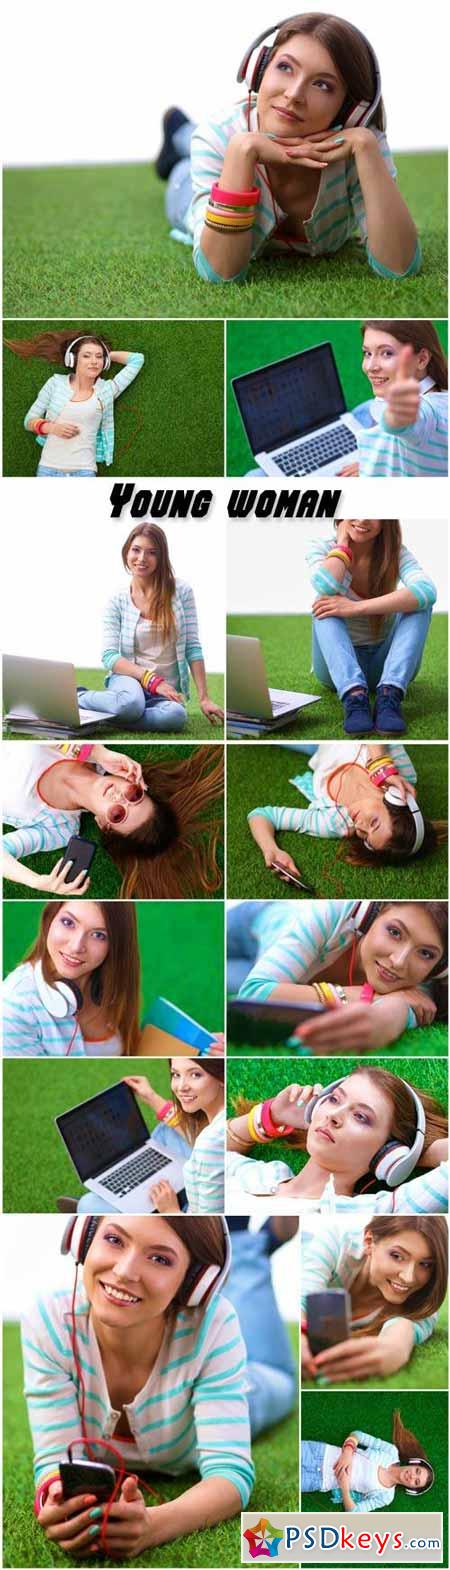 Beautiful young woman with a phone and a laptop on the green grass